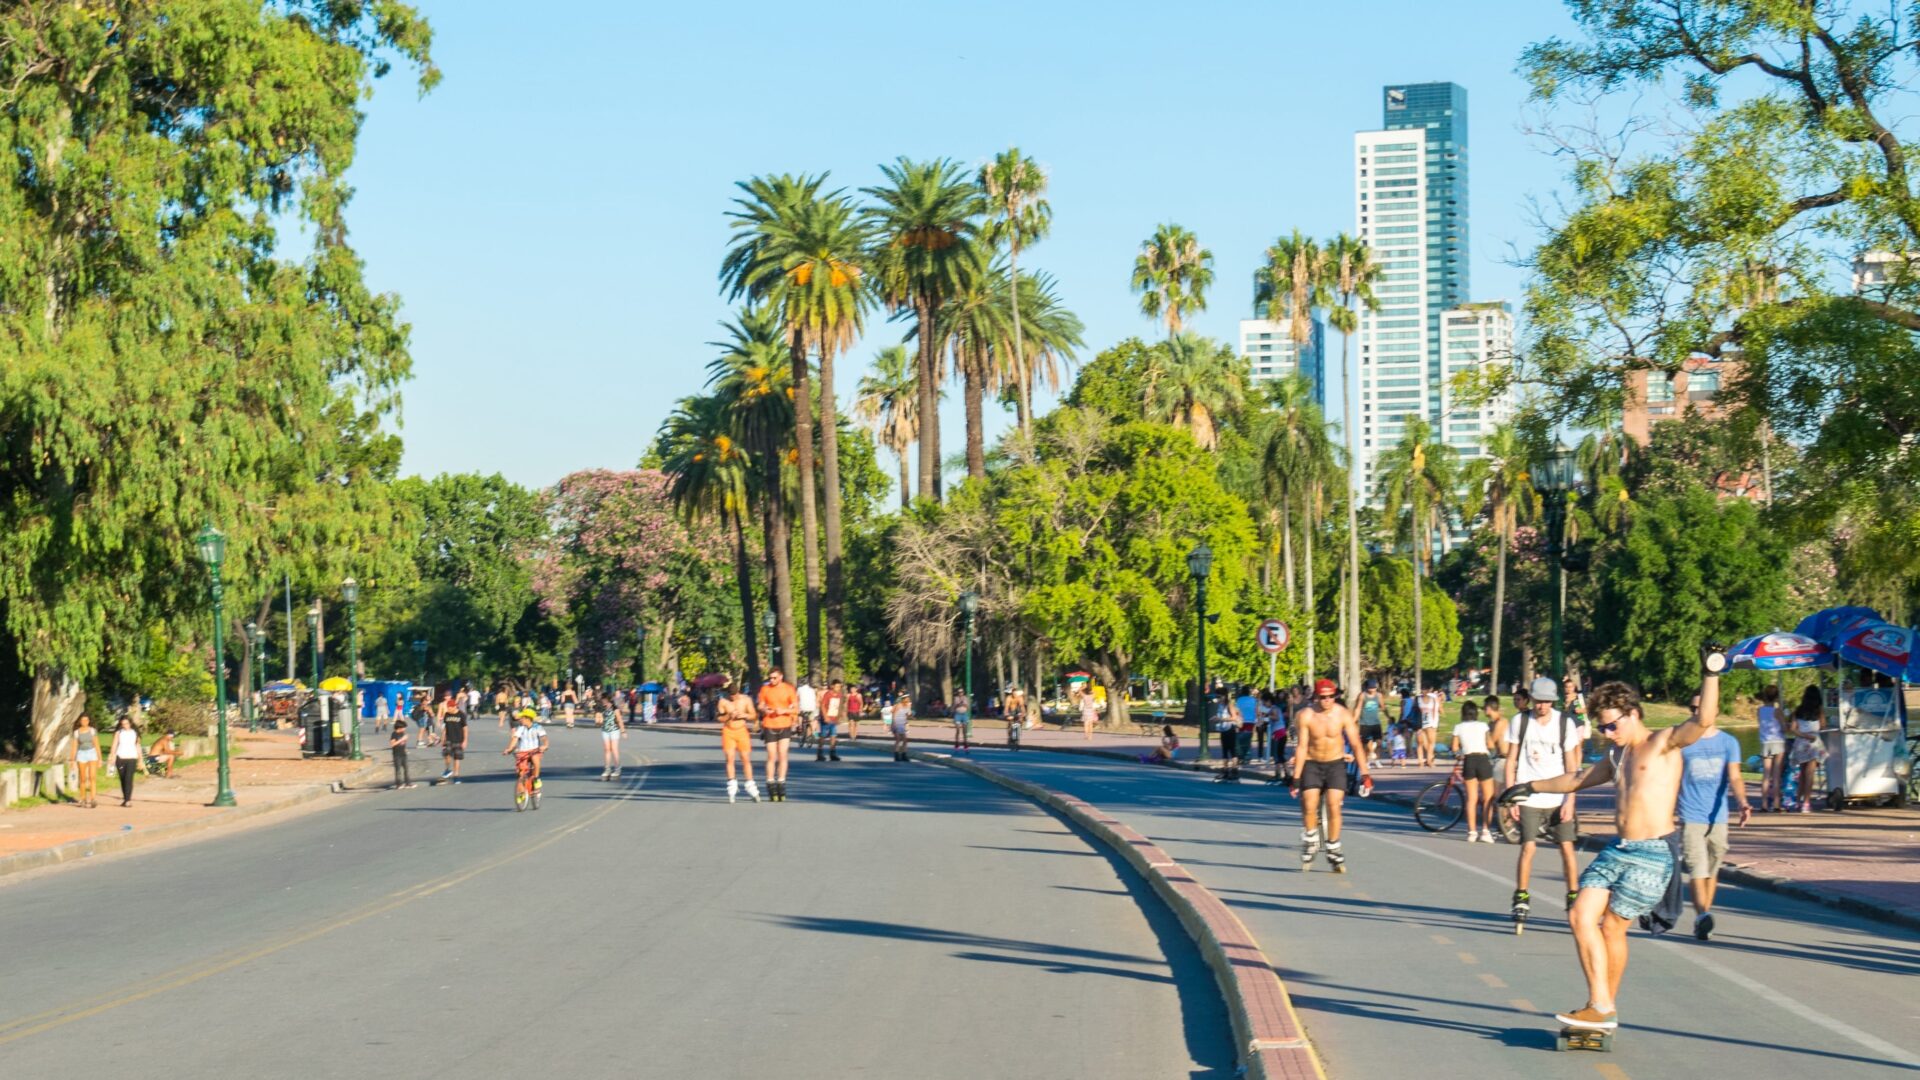 Part of the track that circles the Rosedal Rose Garden in Palermo, Buenos Aires. There are palm trees in the background and people wearing summer clothes are running or walking around.